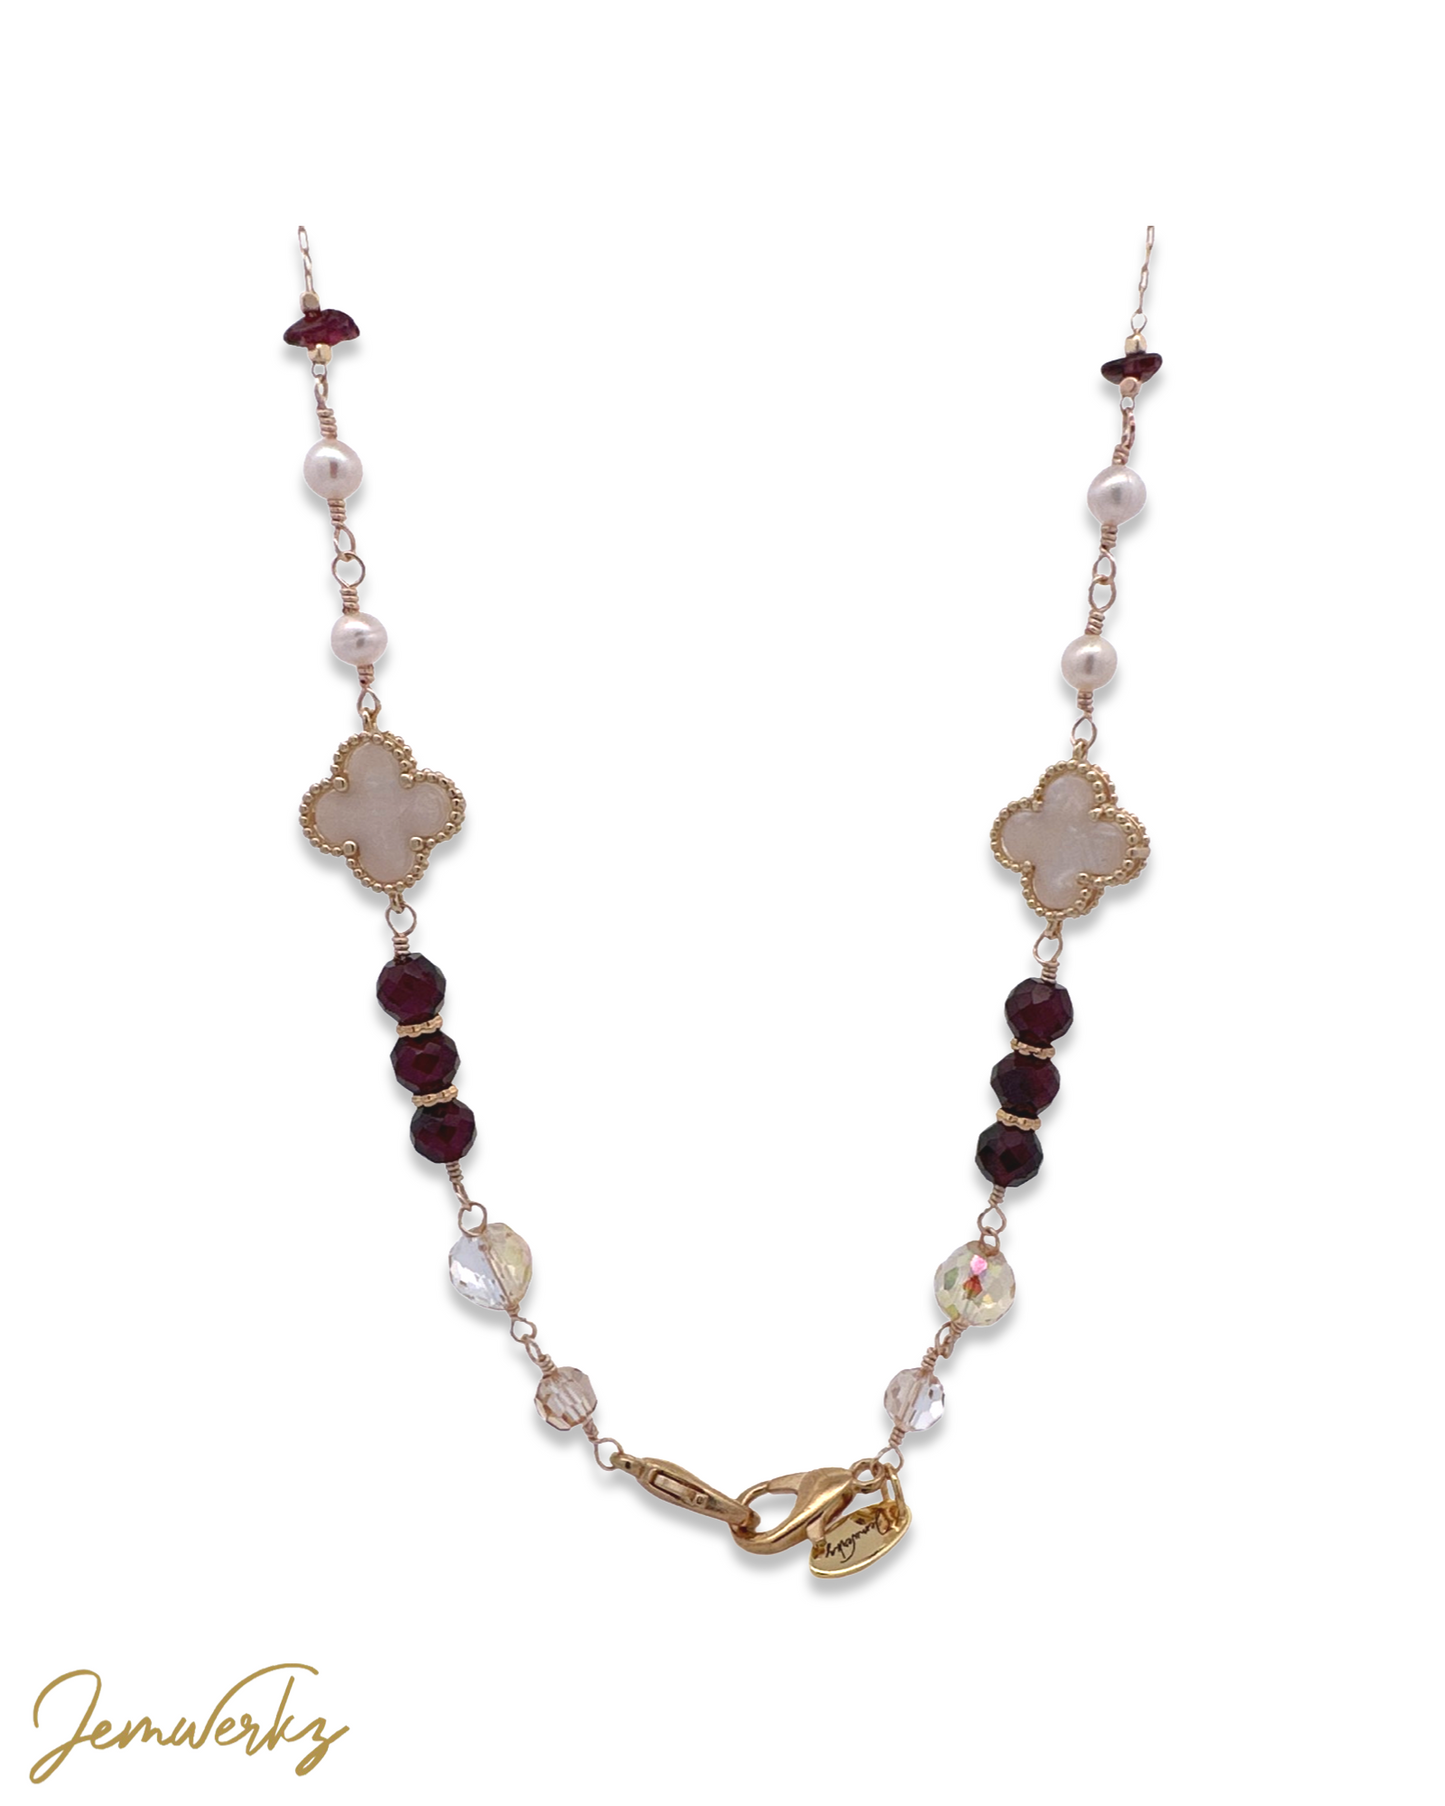 GUREN - Garnet Mask Chain with Freshwater Pearls Swarovski Crystals and Clover Charms